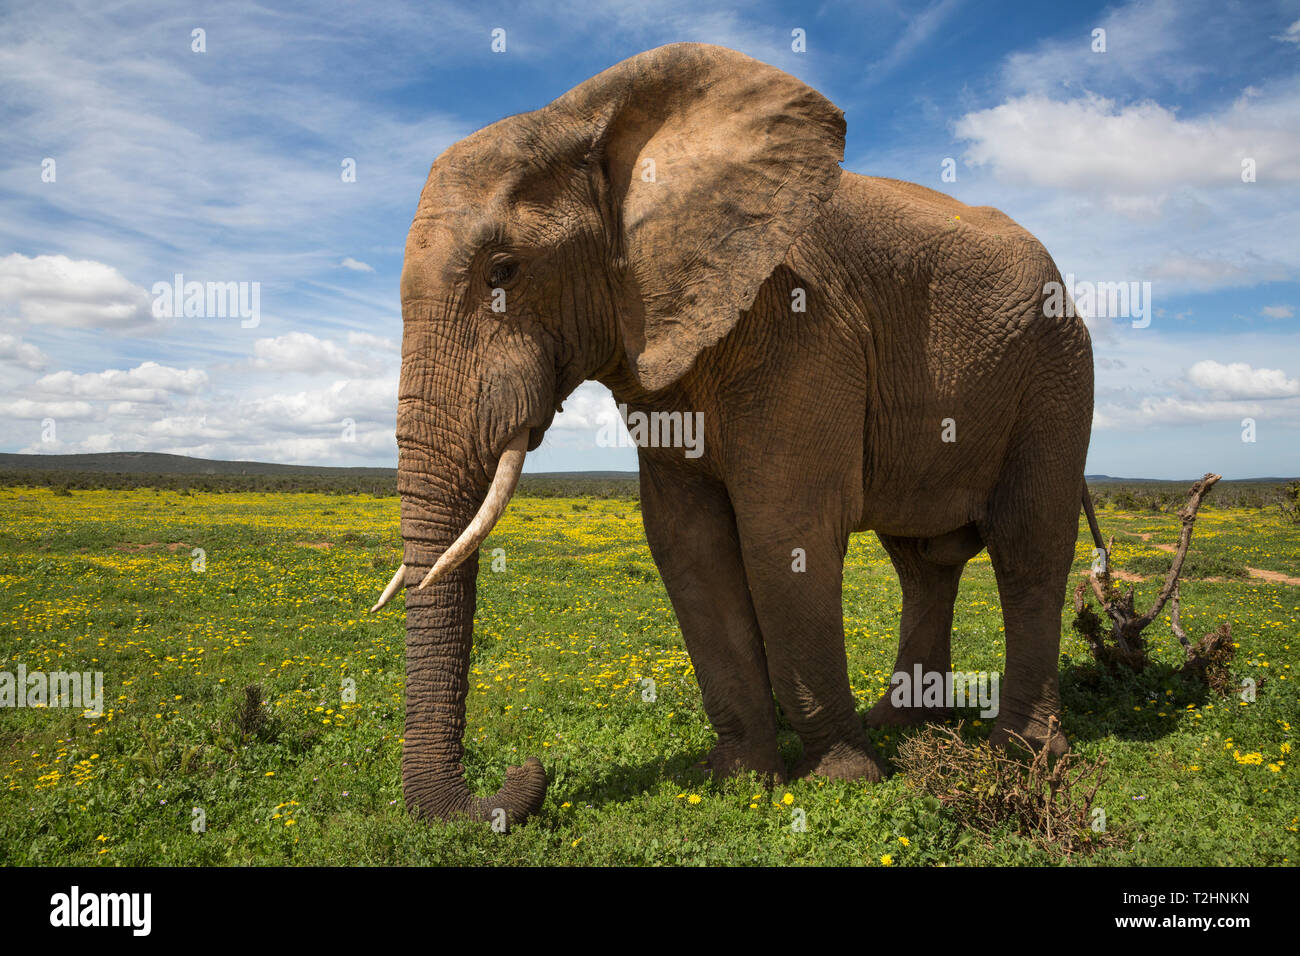 African elephant, Loxodonta africana, in spring flowers, Addo elephant national park, Eastern Cape, South Africa Stock Photo